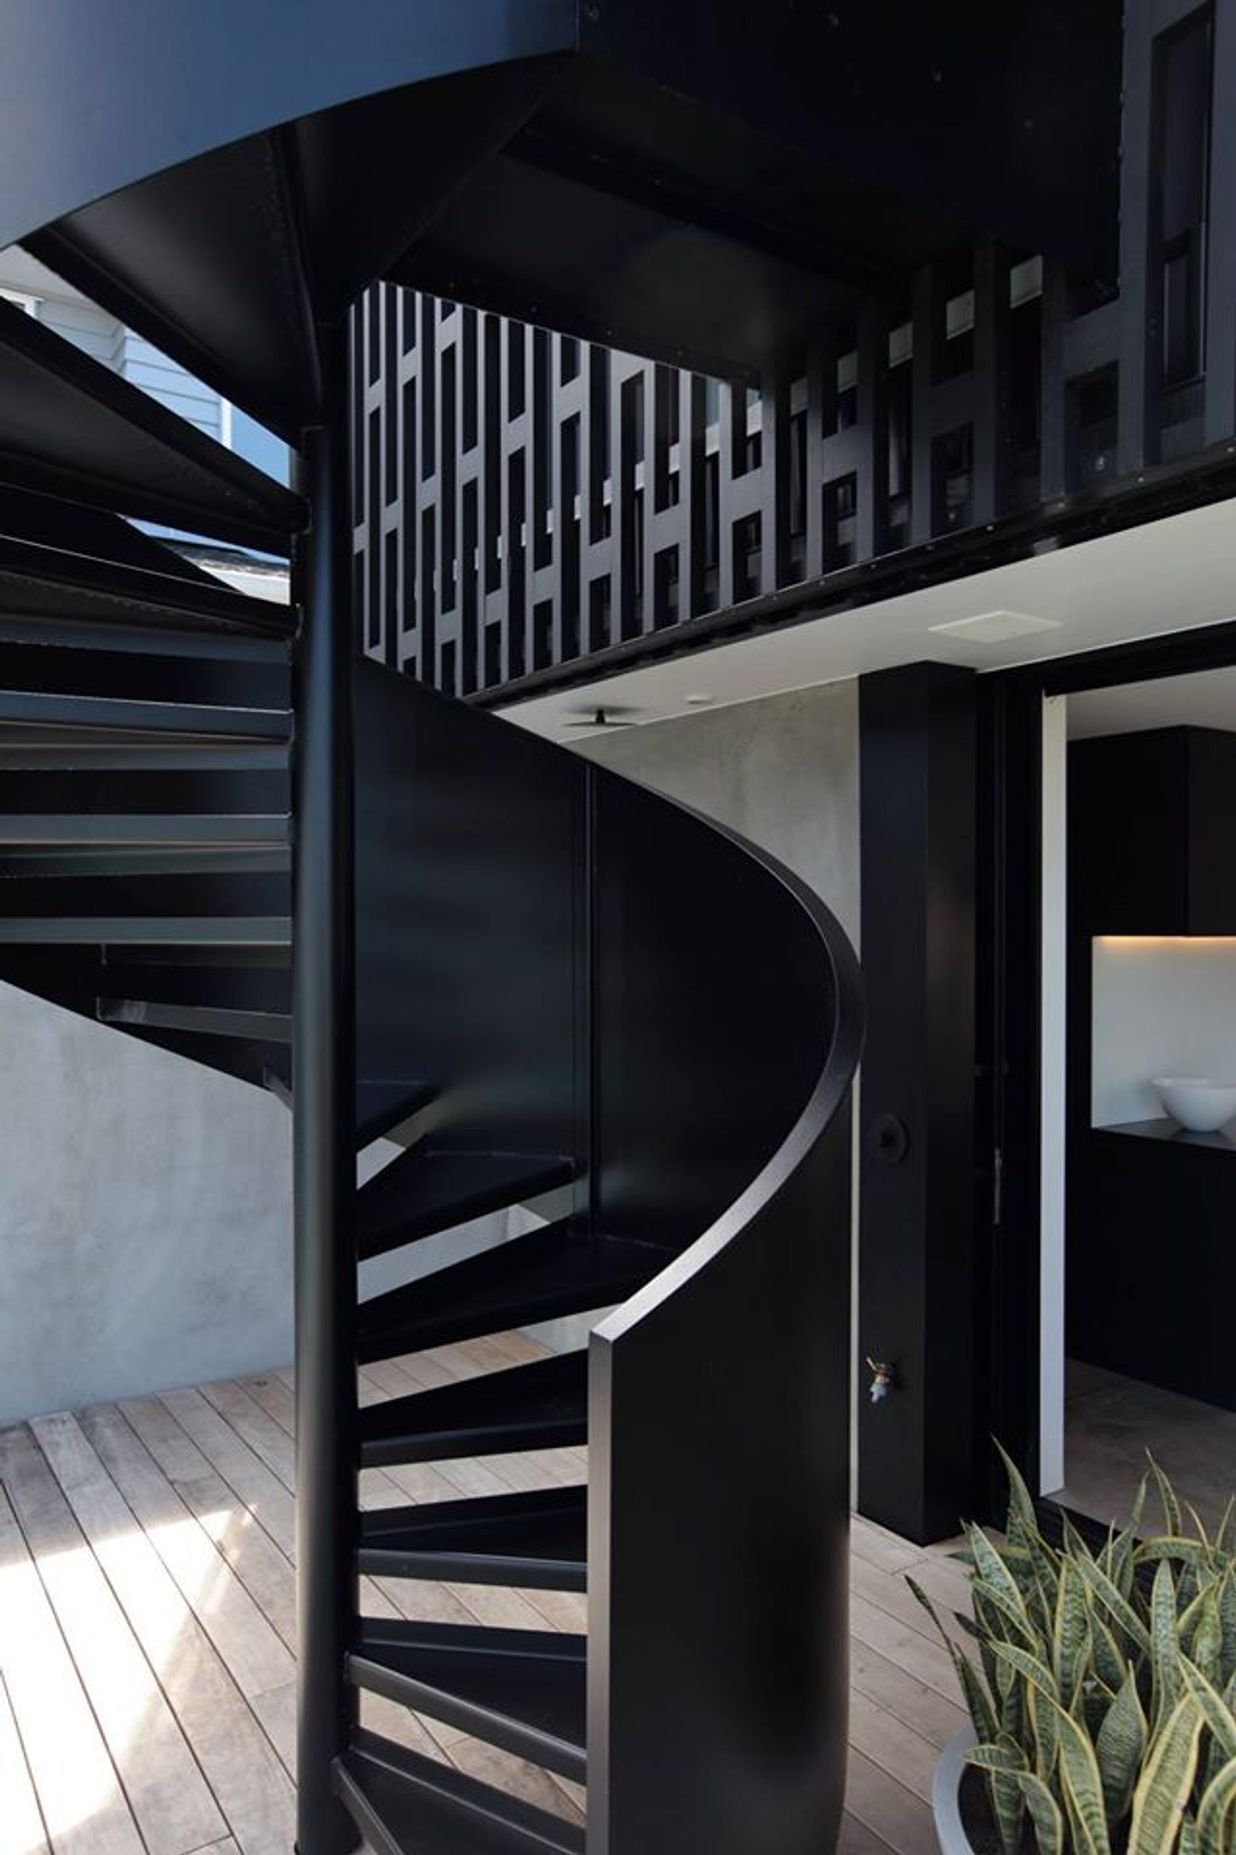 At the other end of the house and on the other side a spiral staircase affords the owners direct access to the backyard from the upper level main bedroom.